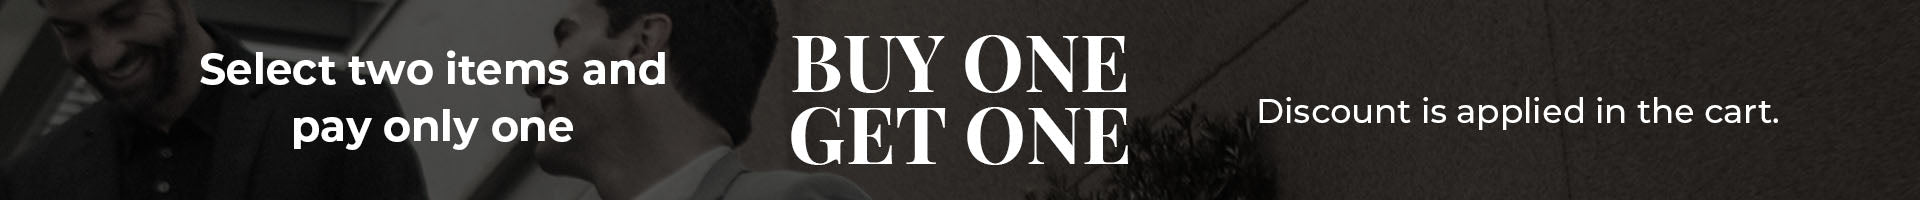 Buy One Get One Sandro Moscoloni in selected styles